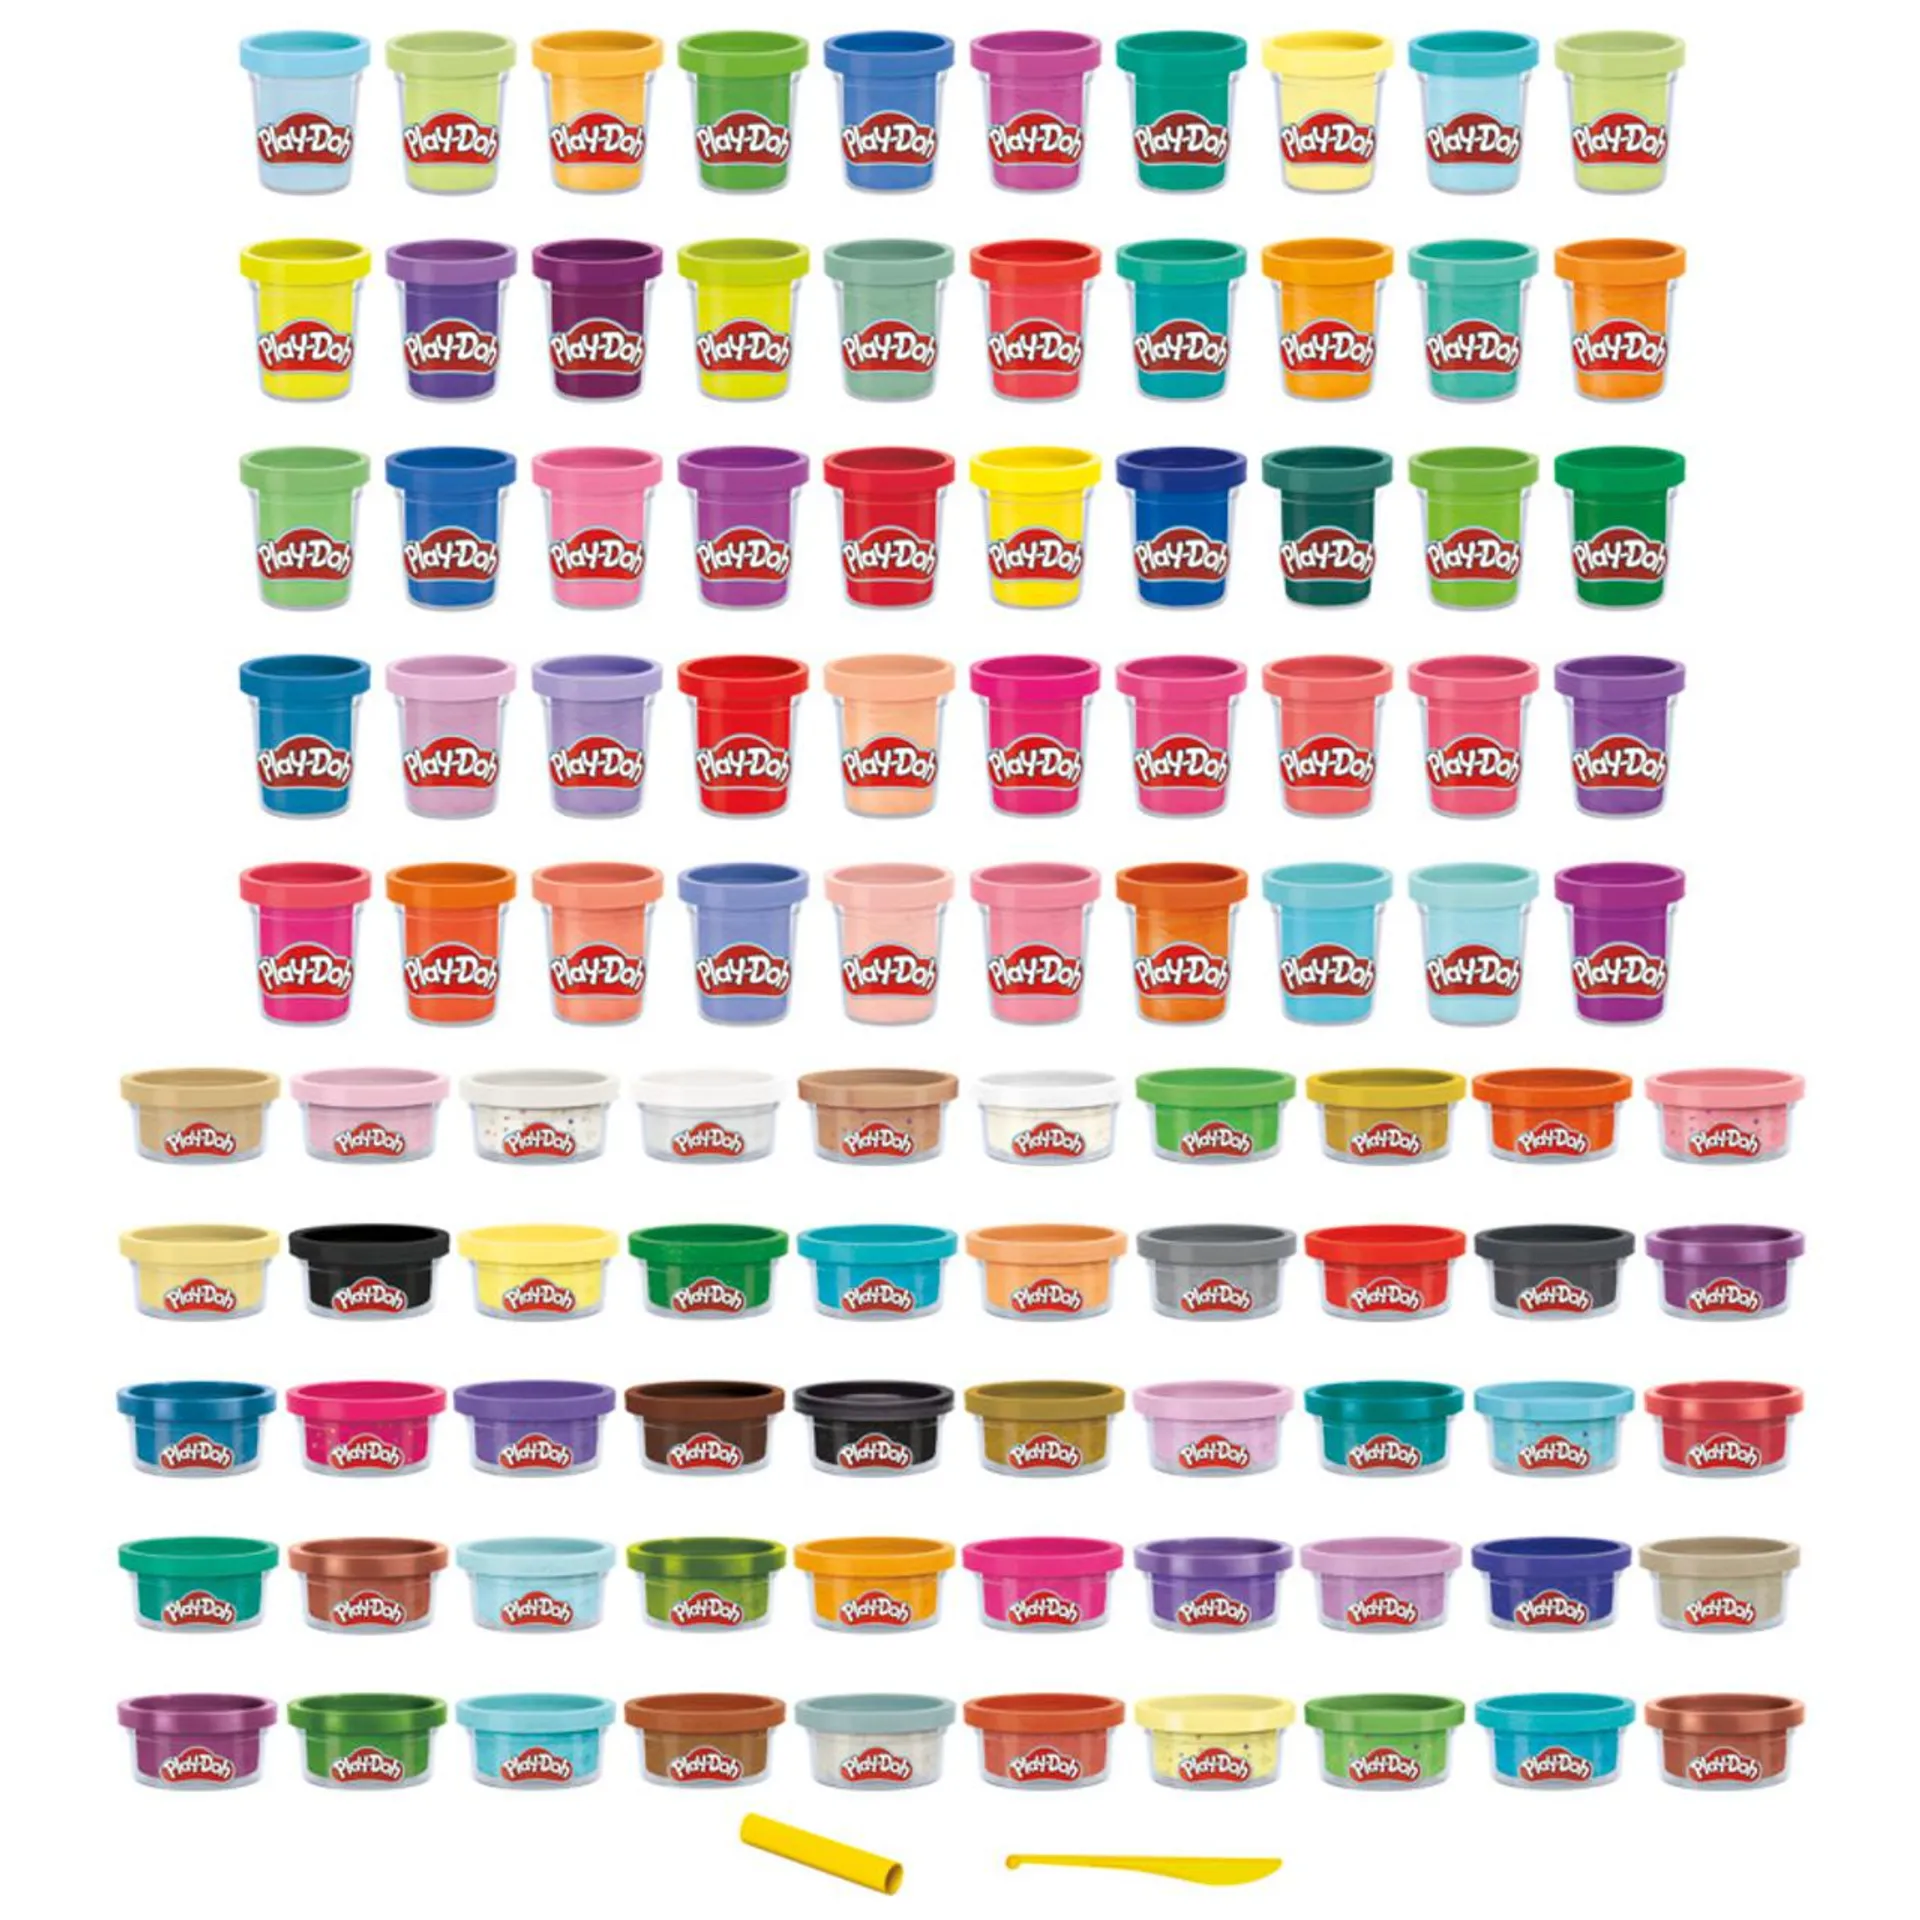 Play-Doh Wow 100 Colour Variety Pack